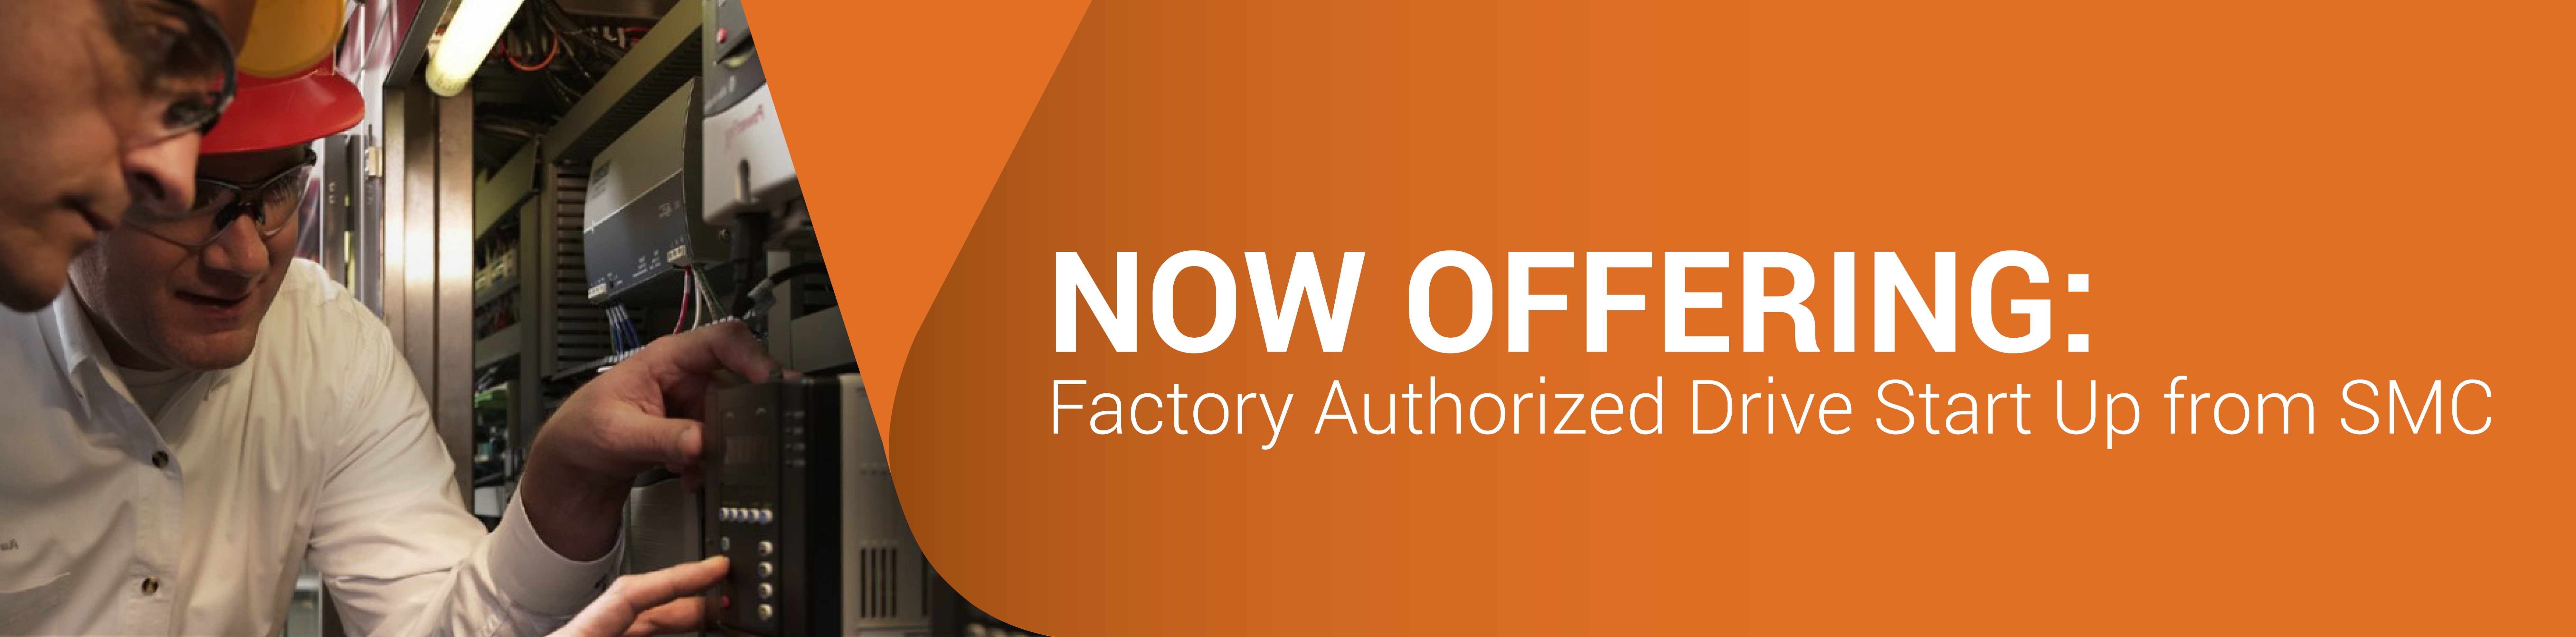 Factory Authorized Drive Start Up